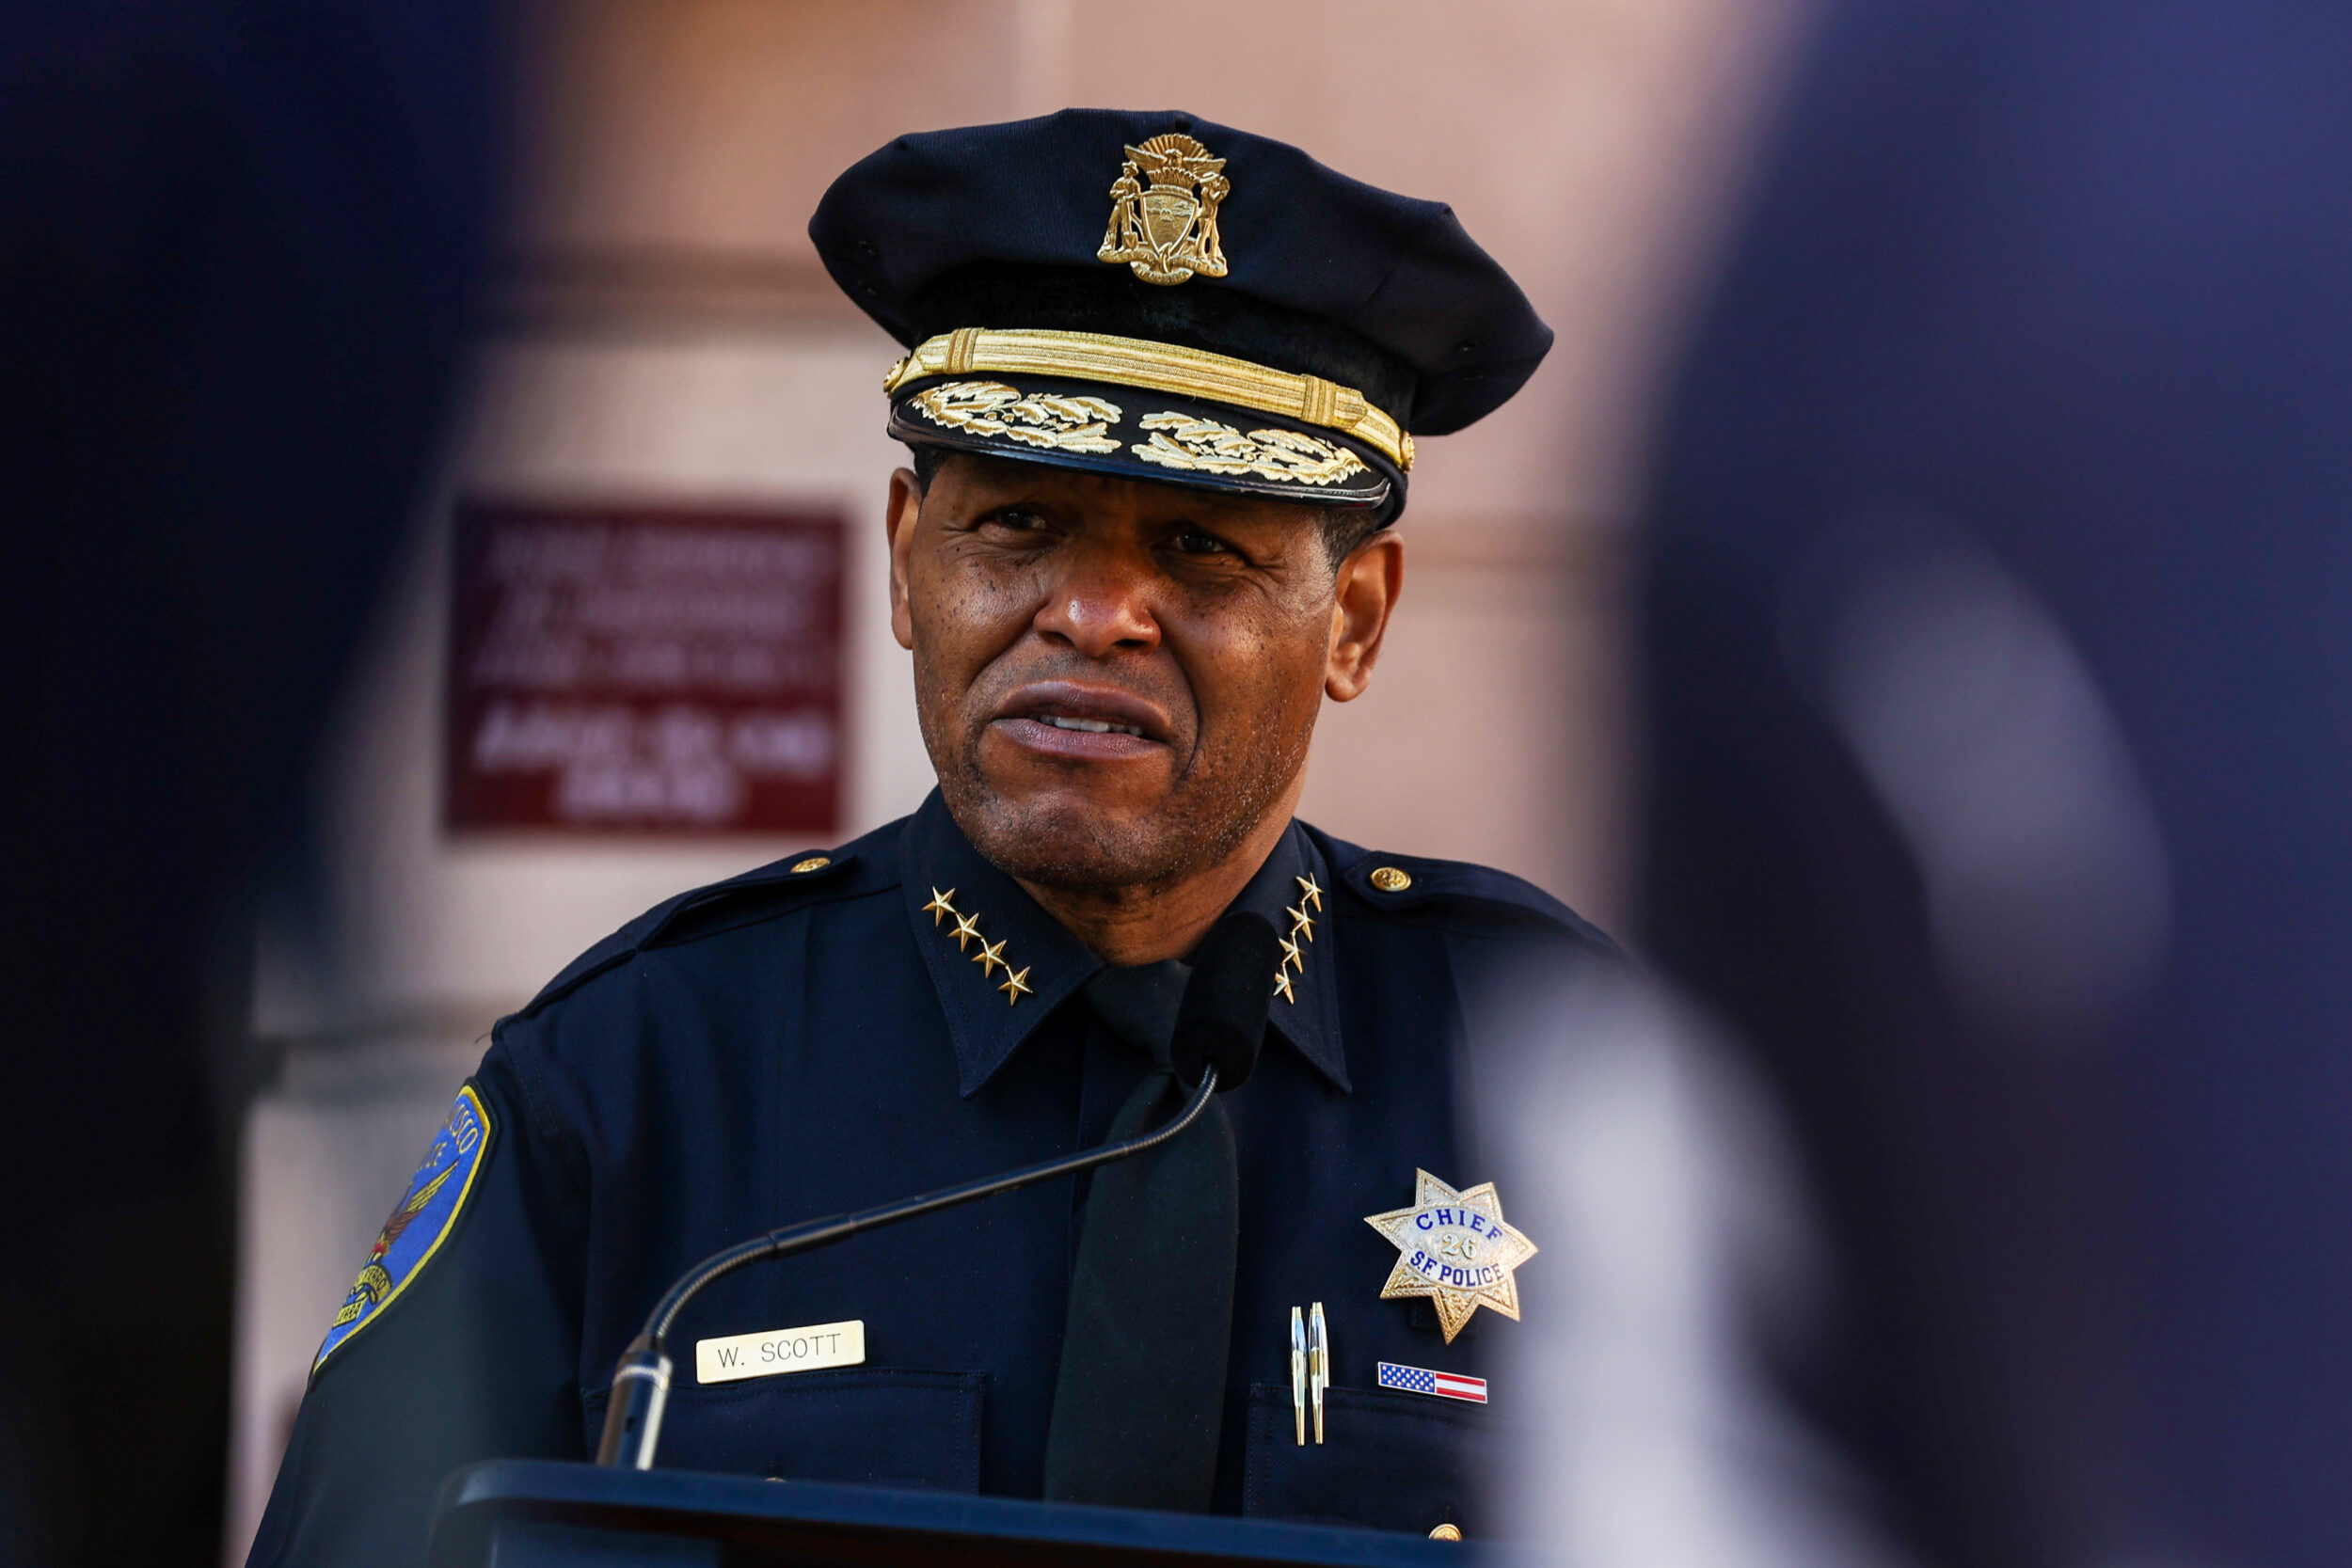 SFPD Chief Scott speaks on police response to the rise in AAPI hate crimes on Jan. 25, 2022.